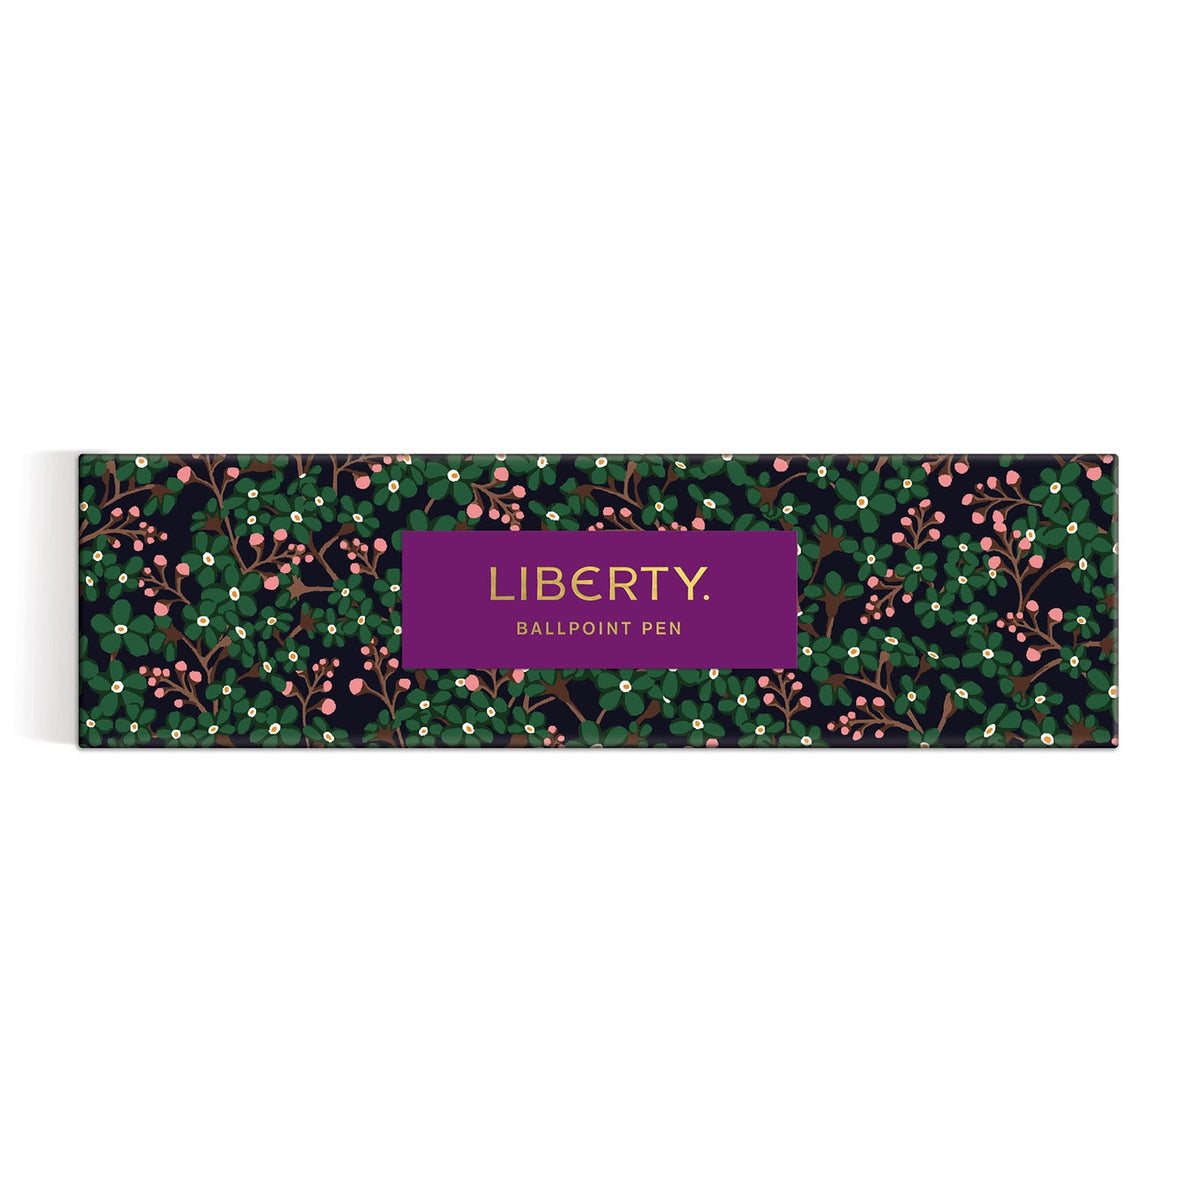 liberty-star-anise-boxed-pen-galison-152556